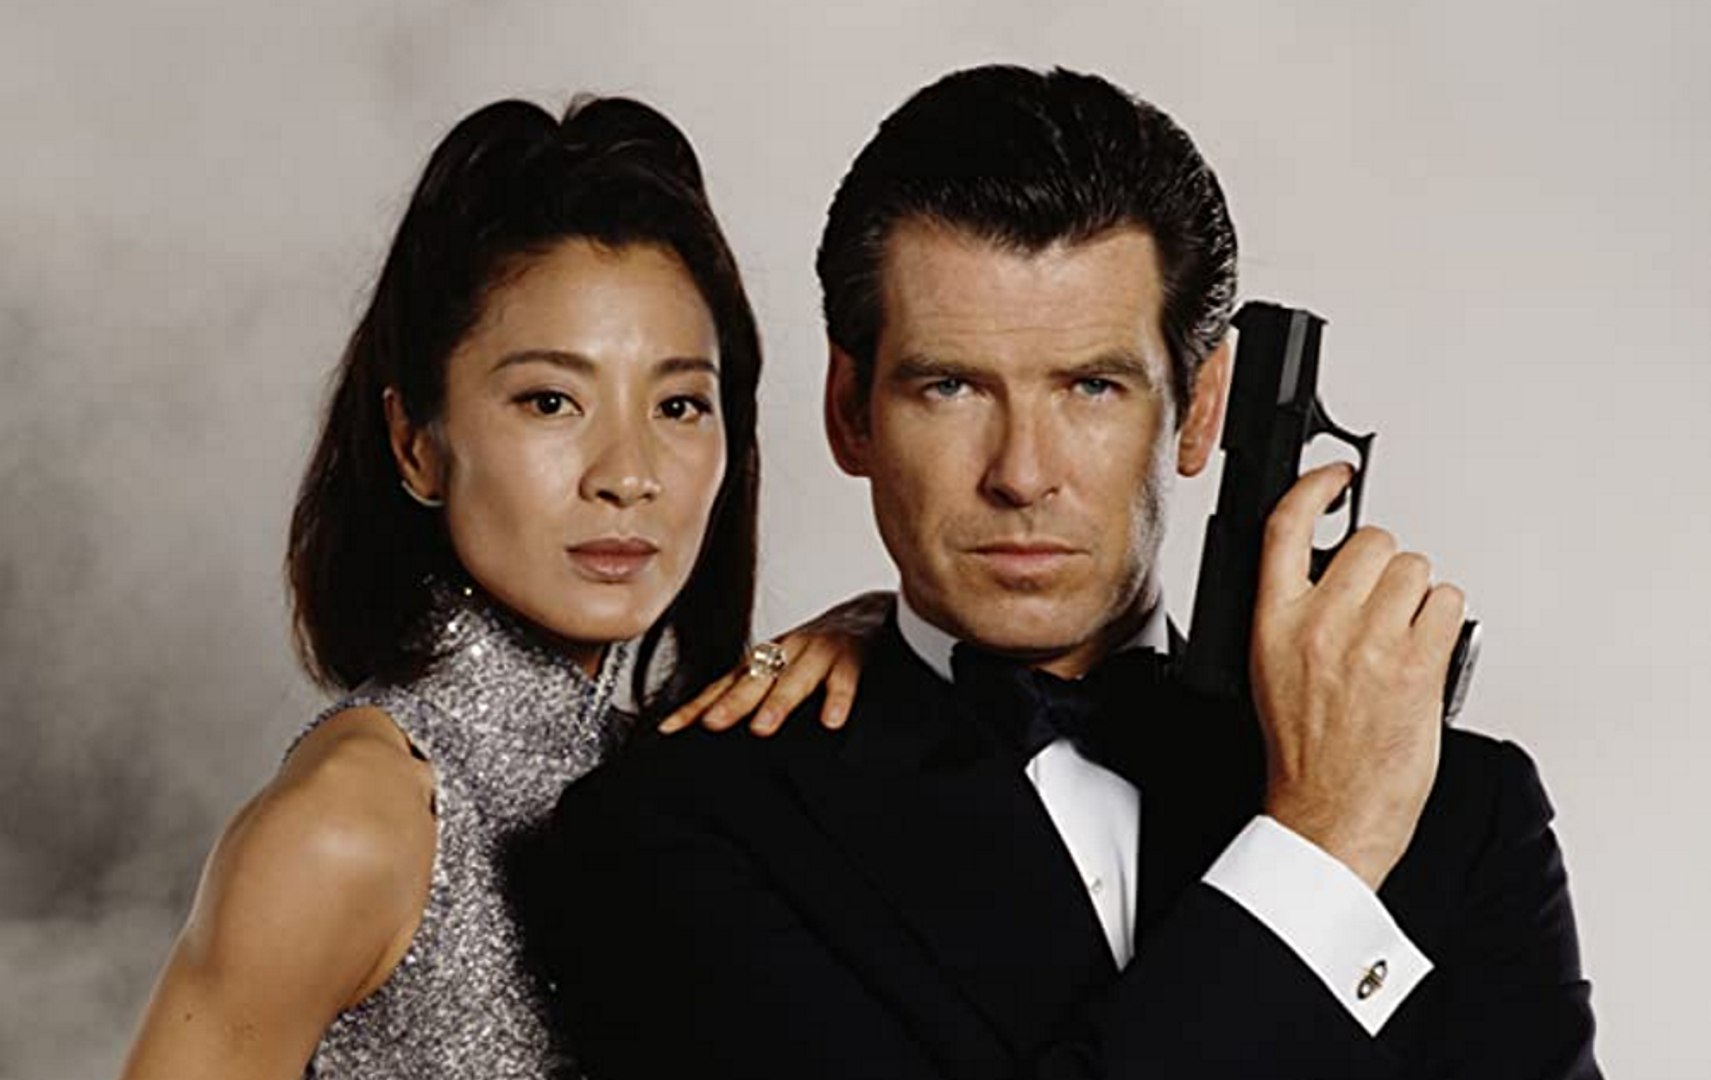 James Bond TOMORROW NEVER DIES movie (1997) - Clip with Pierce Brosnan and  Michelle Yeoh - Bond vs helicopter - video Dailymotion